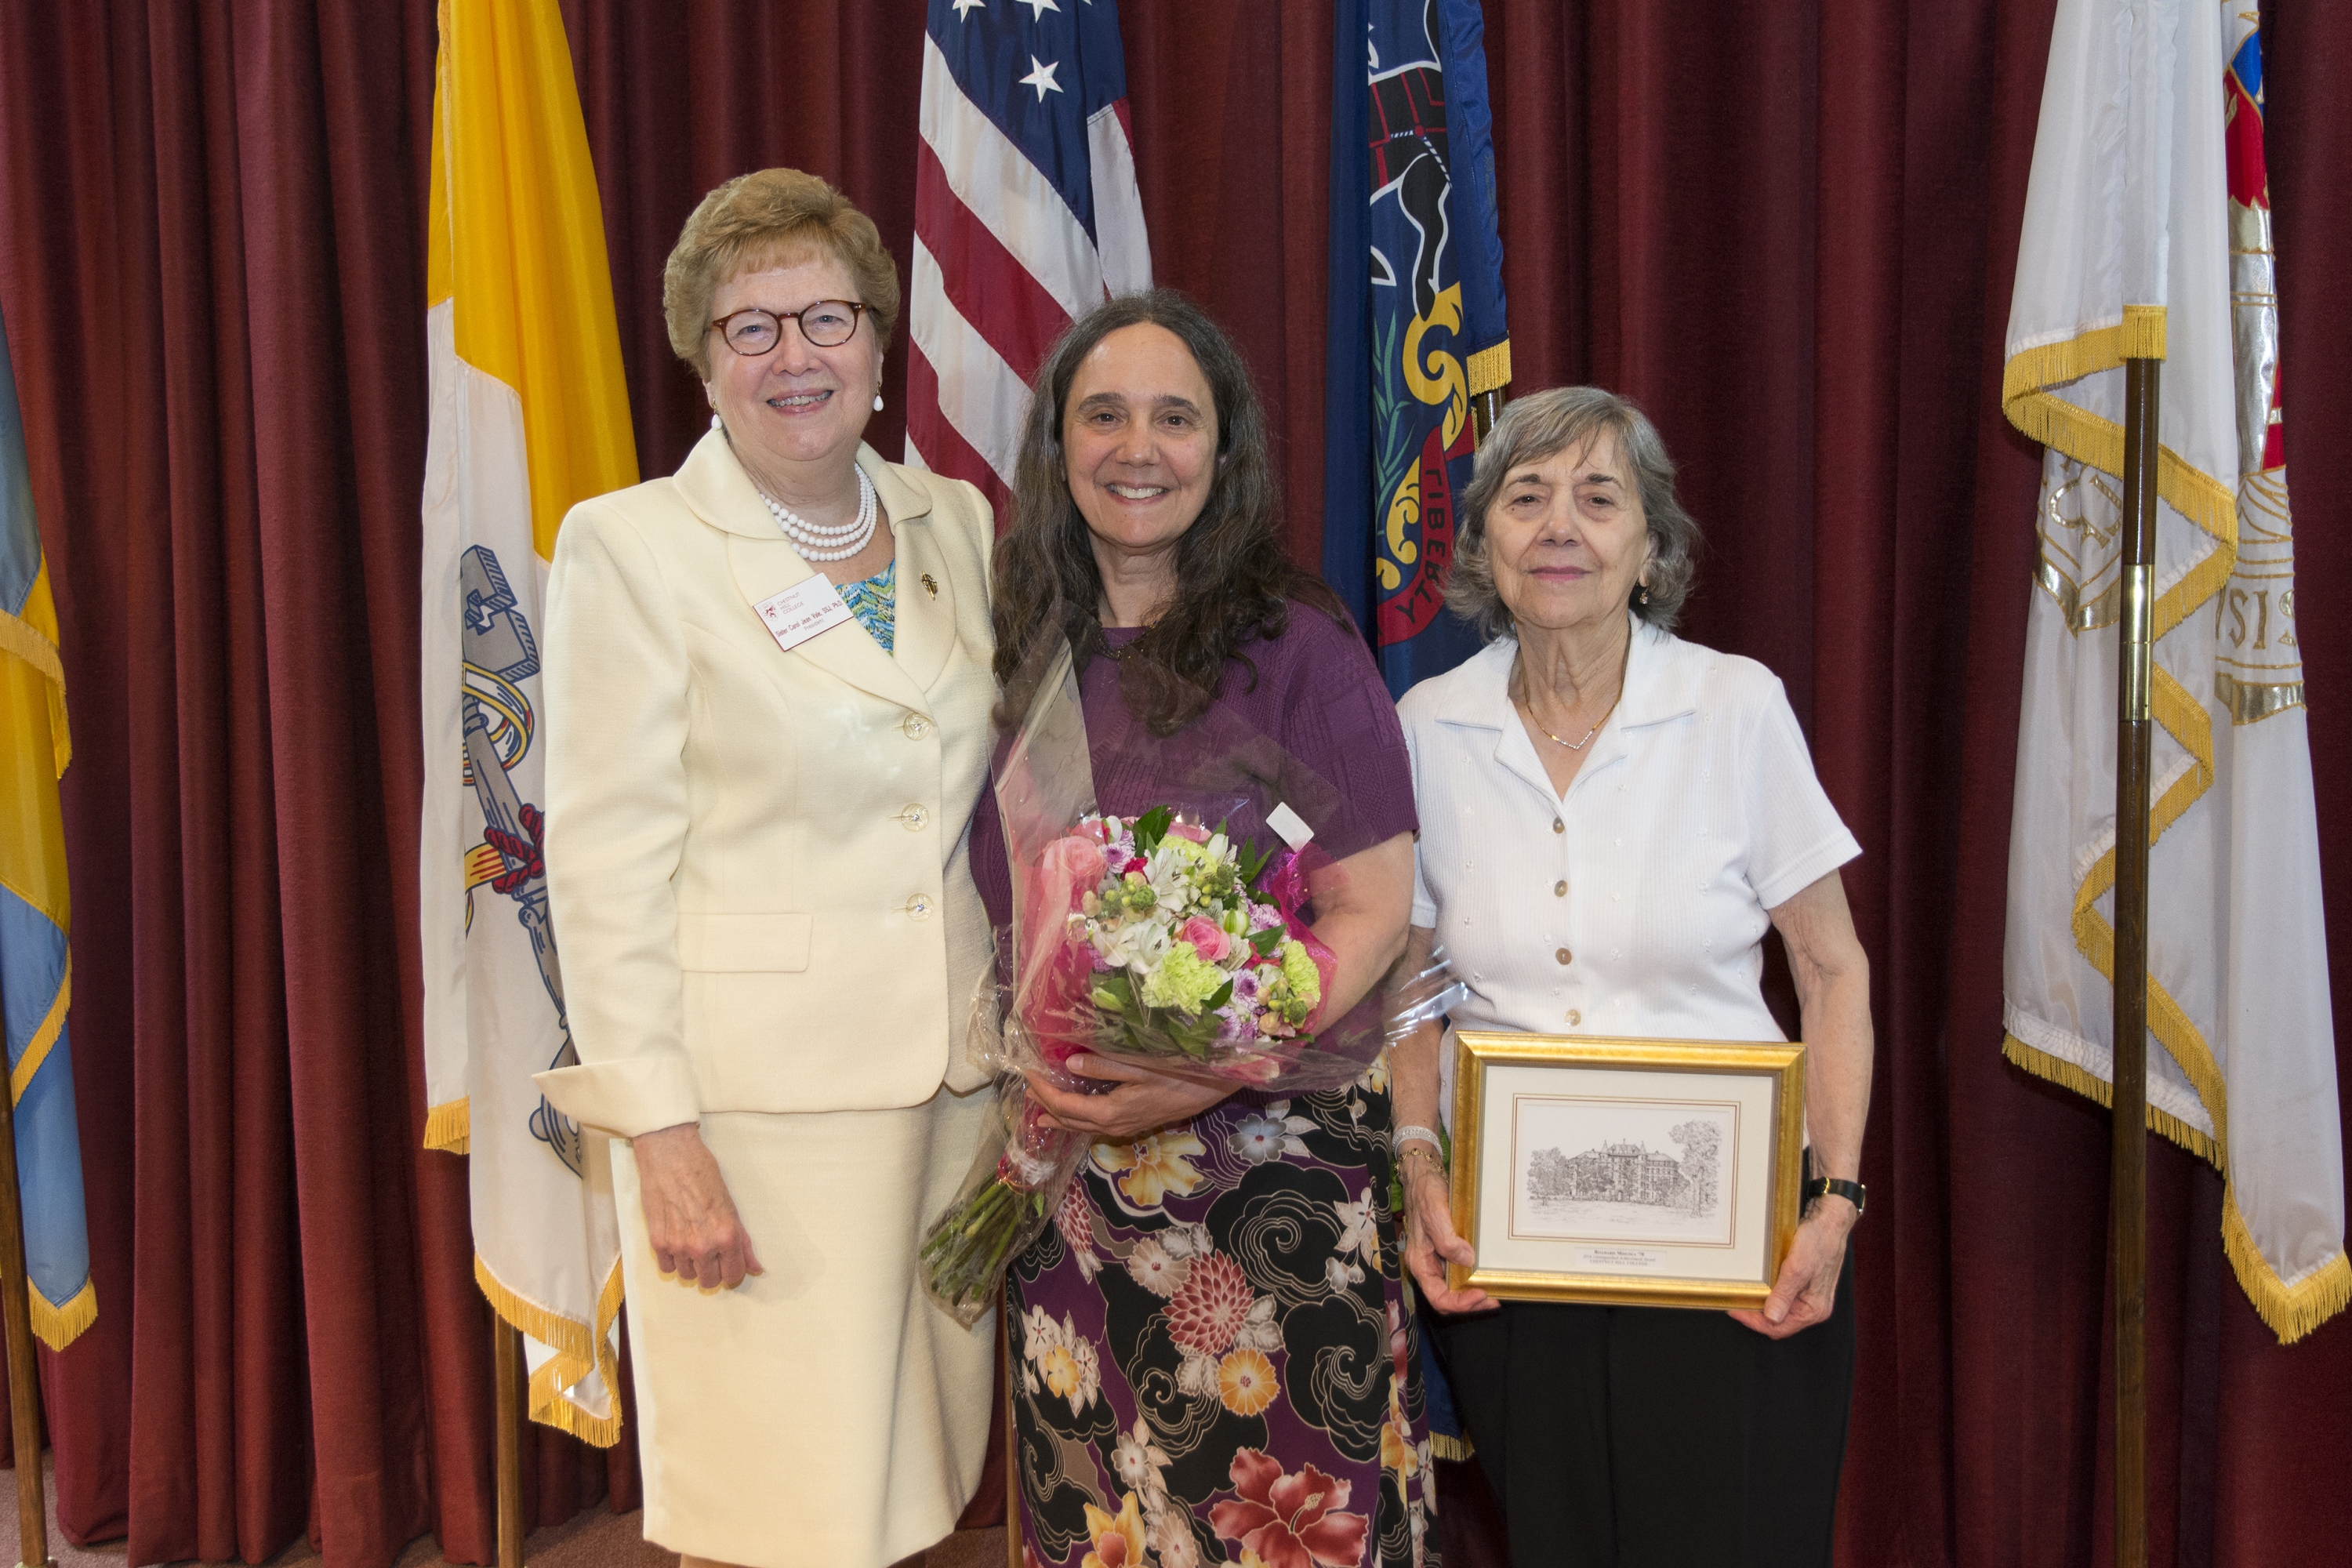 Ritamarie Moscola M.D., M.P.H. '78, center, and her mother pose with Sister Carol after the ceremony.